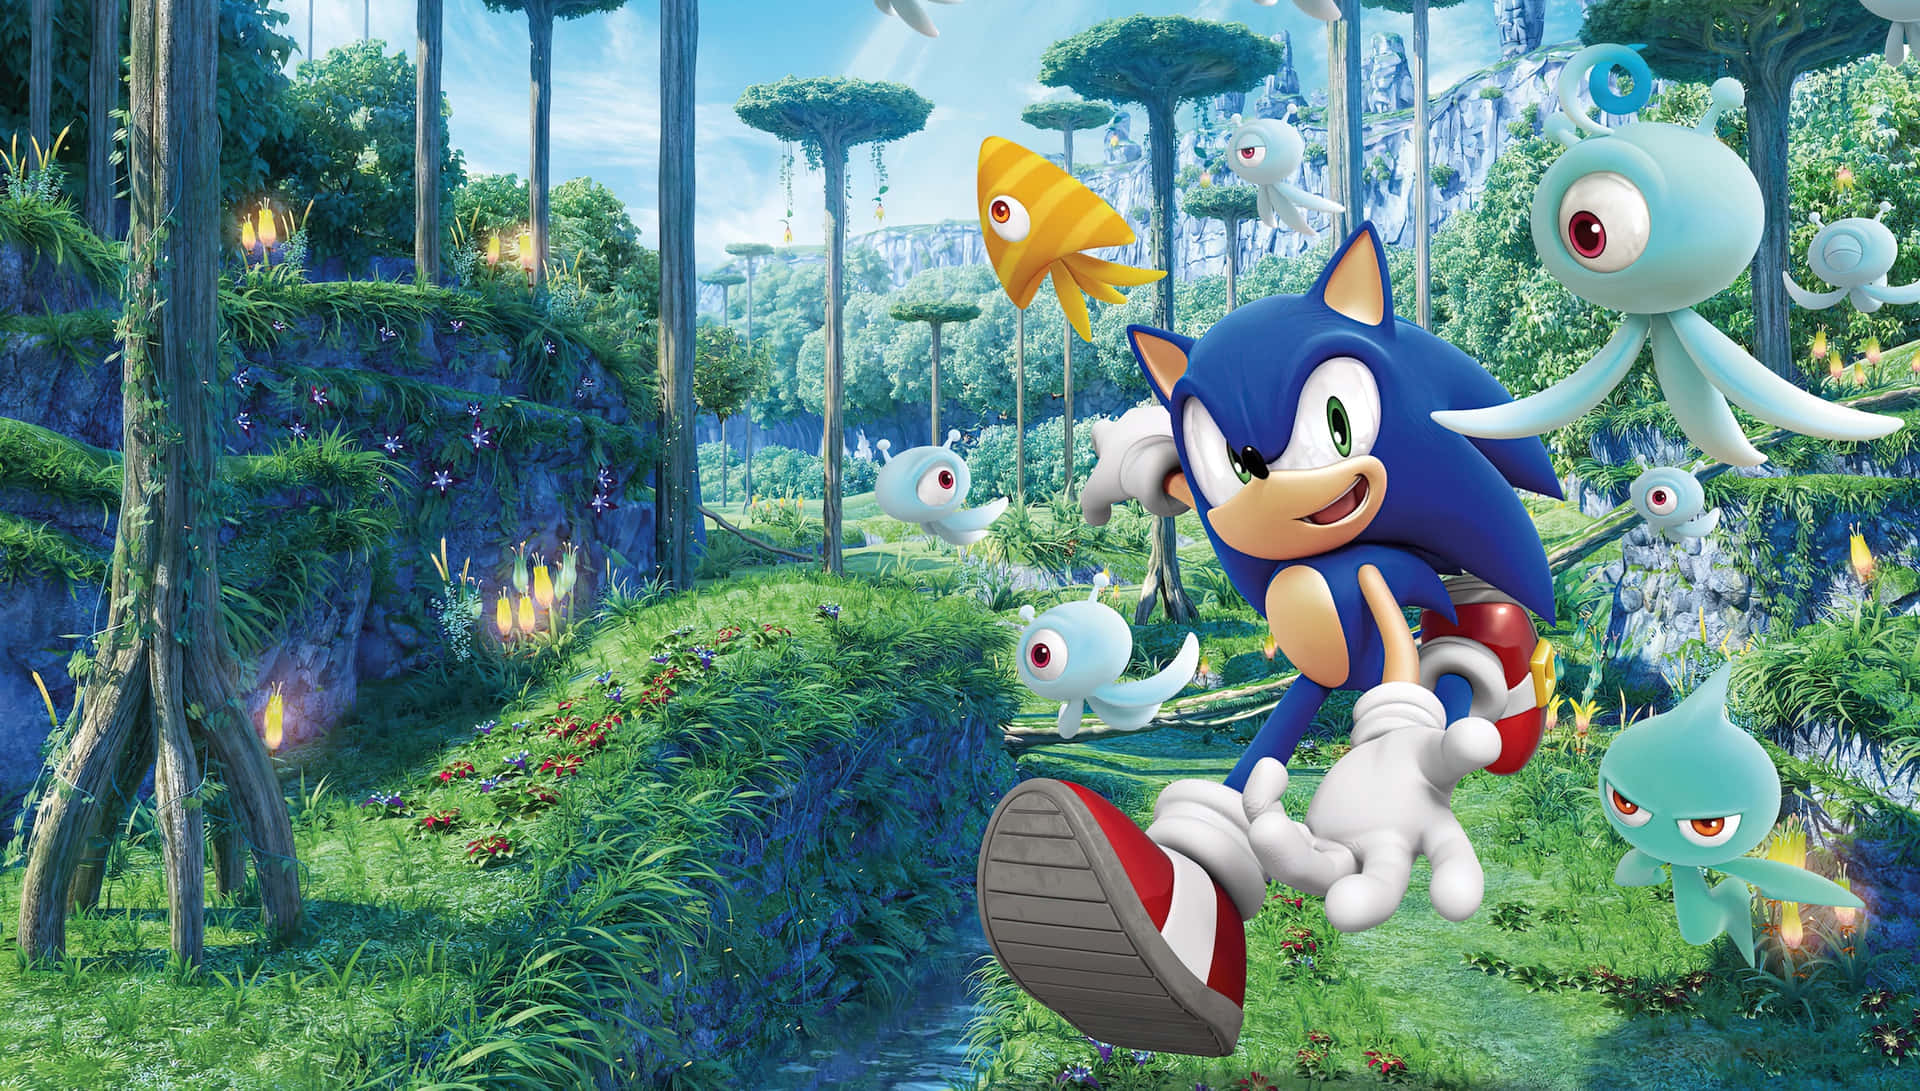 Sonic the Hedgehog sprints through a lush, green forest Wallpaper